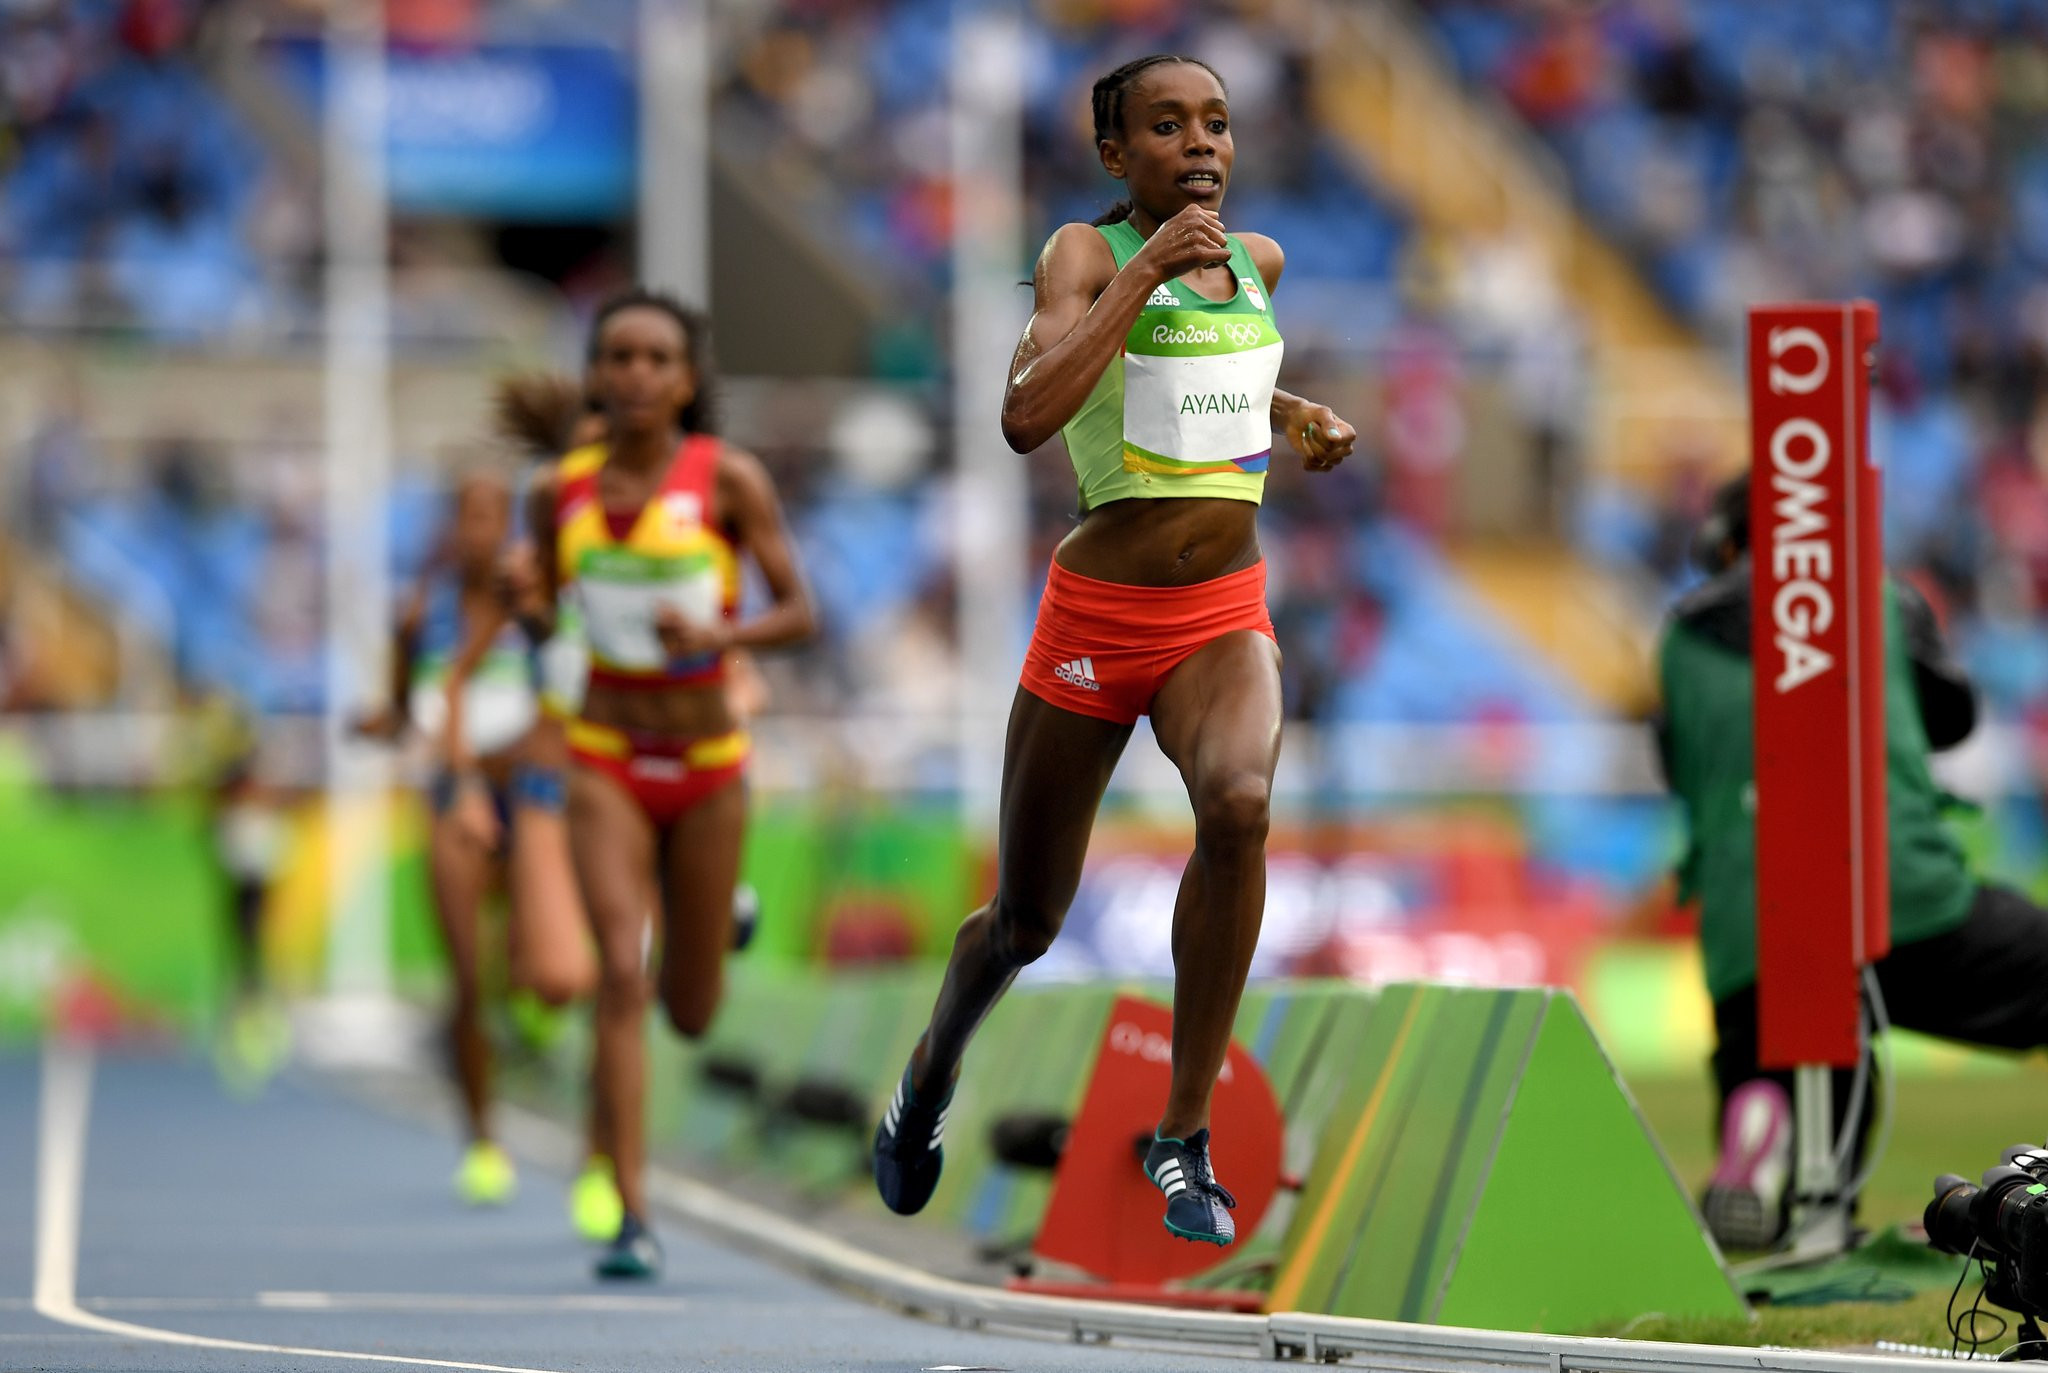 Sonia O'Sullivan doubted the performance of Ethiopia's Almaz Ayana at Rio 2016 after she broke the 10,000 metres world record set in 1993 by China's Wang Junxia ©Getty Images